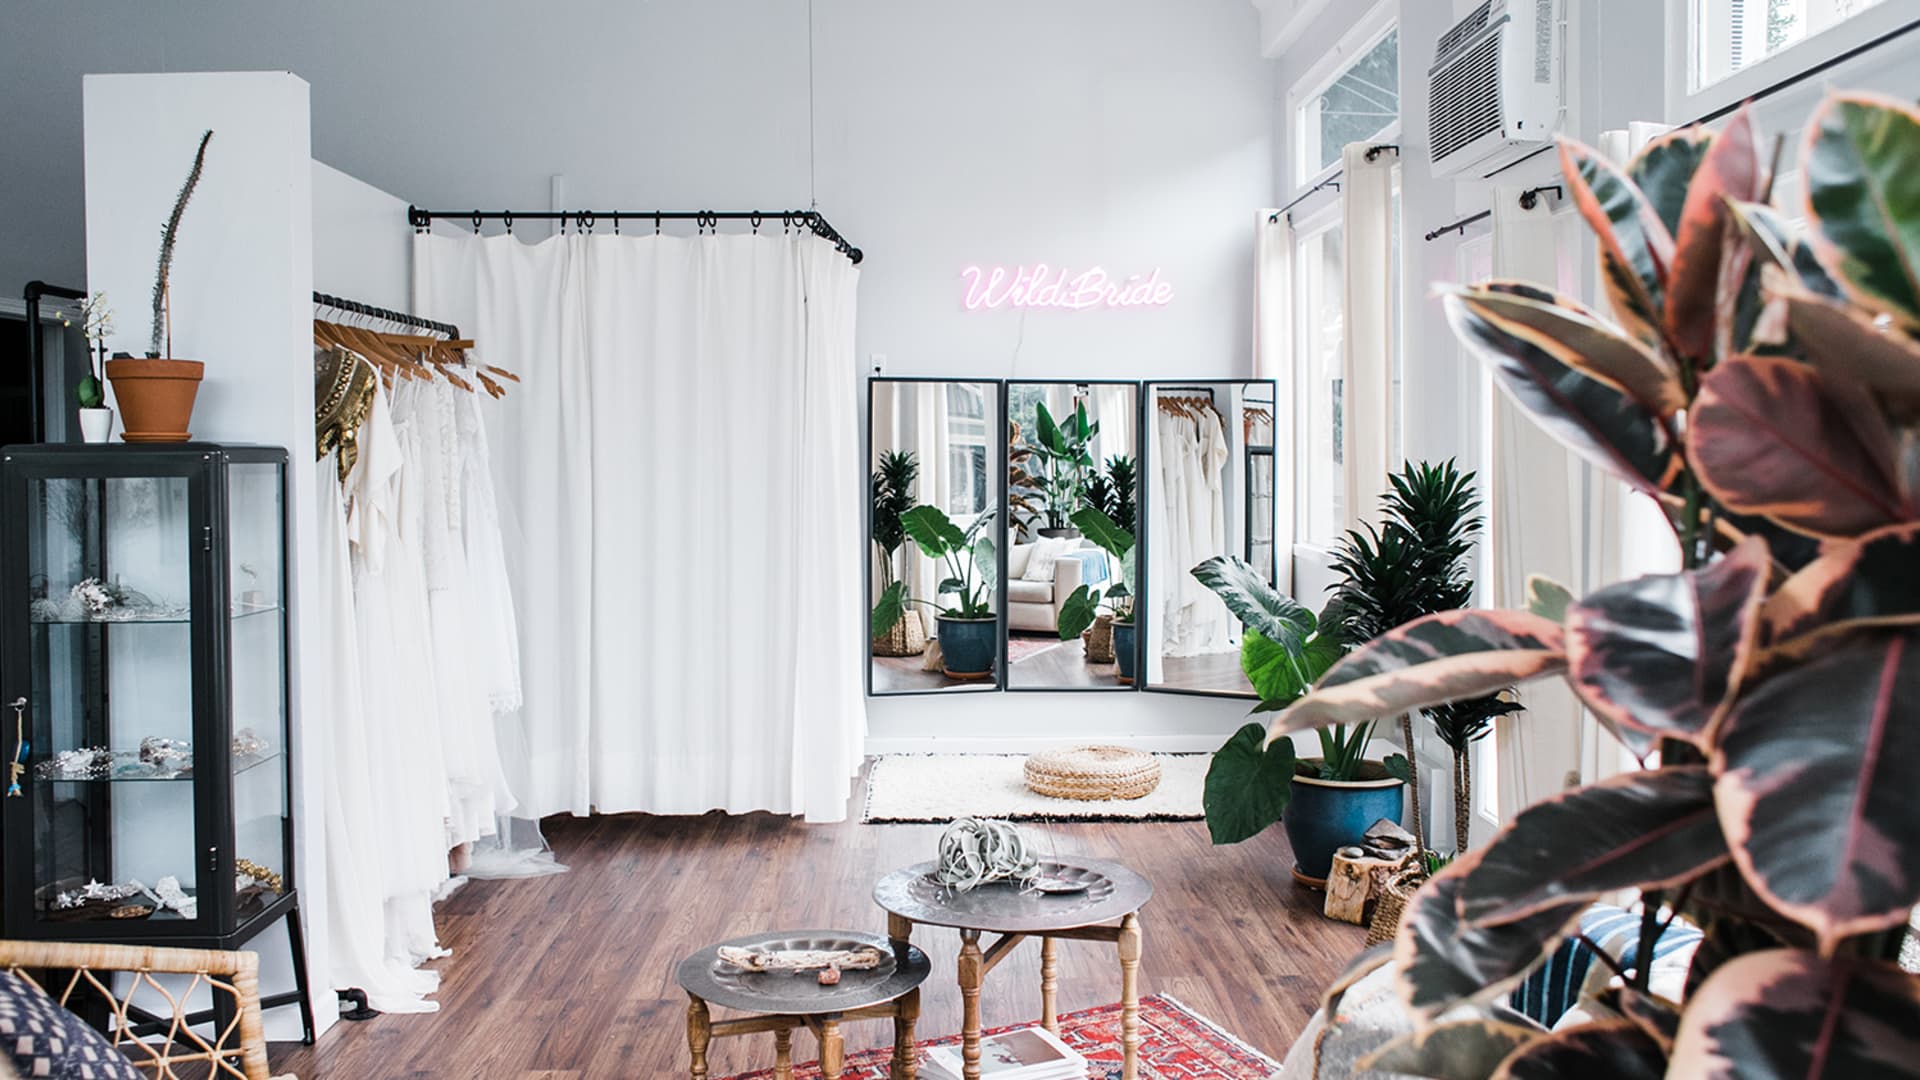 WildBride, a bridal boutique located in San Francisco, is seeing an uptick in demand for its dresses coupled with heightened supply chain complications.